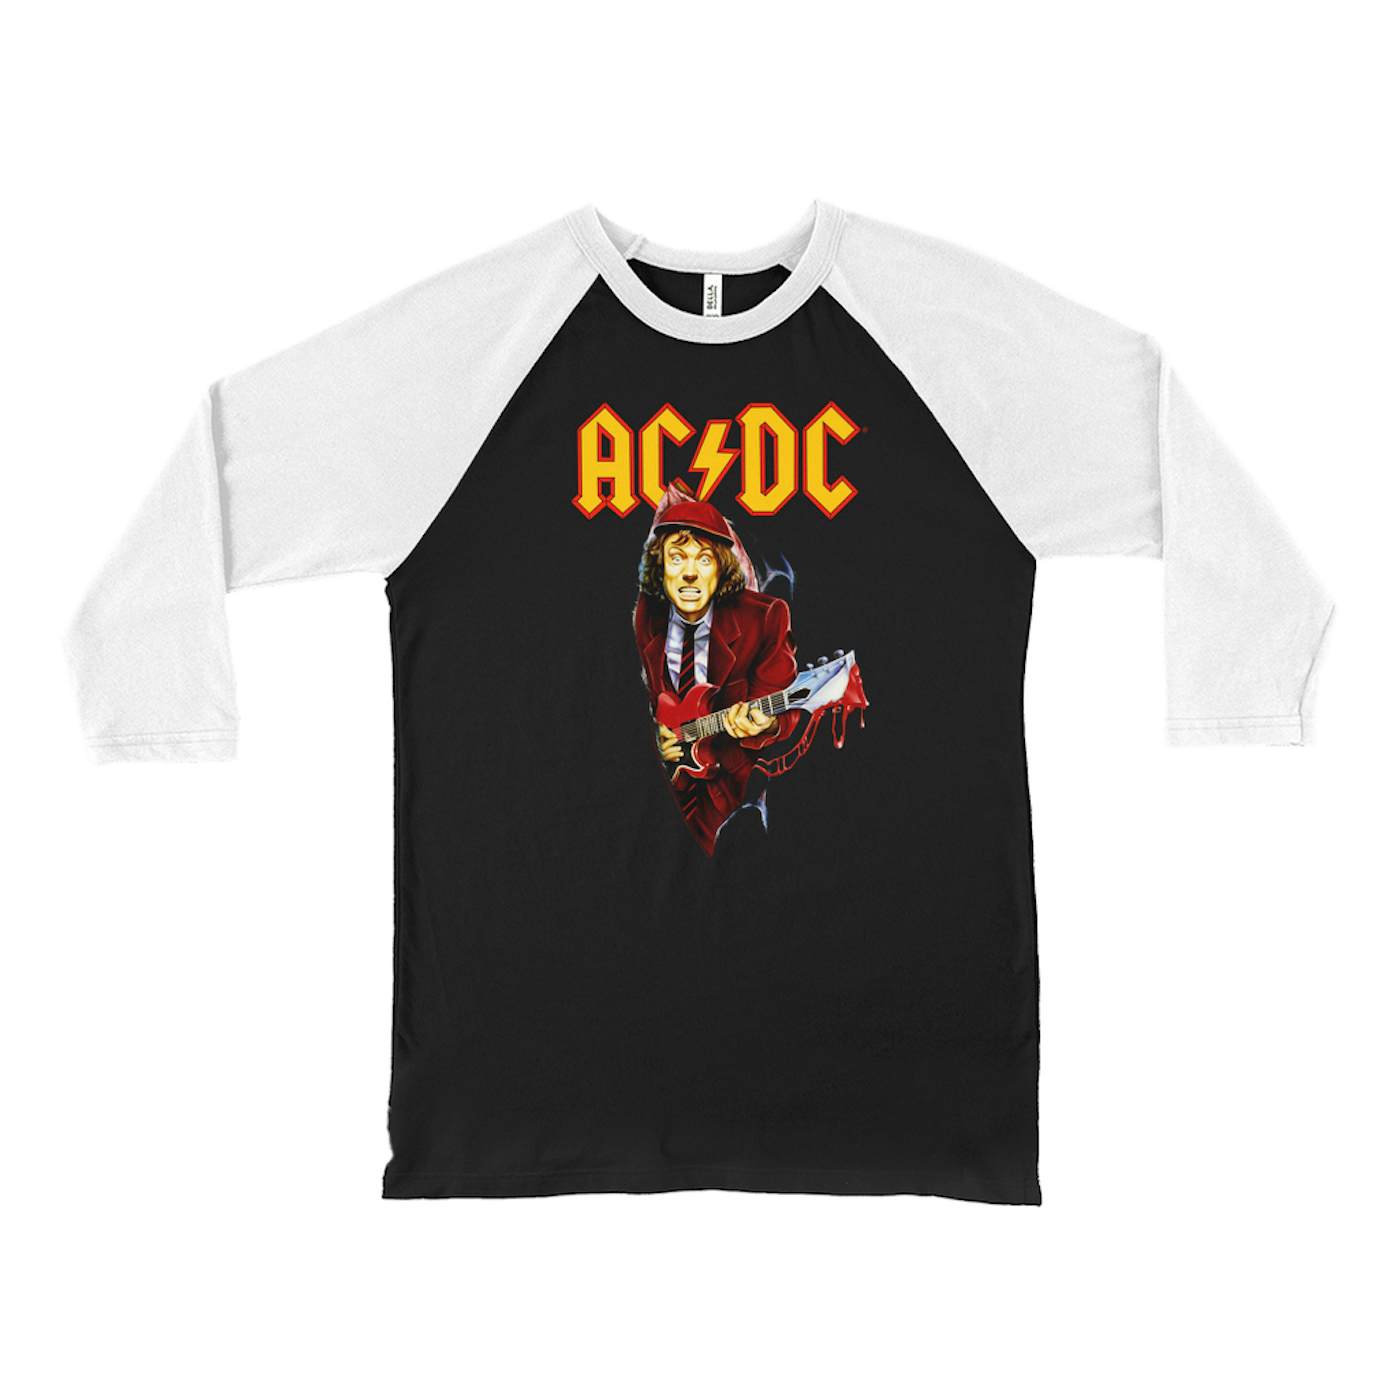 AC/DC 3/4 Sleeve Baseball Tee | Angus Young With Bloody Guitar Design ACDC Shirt